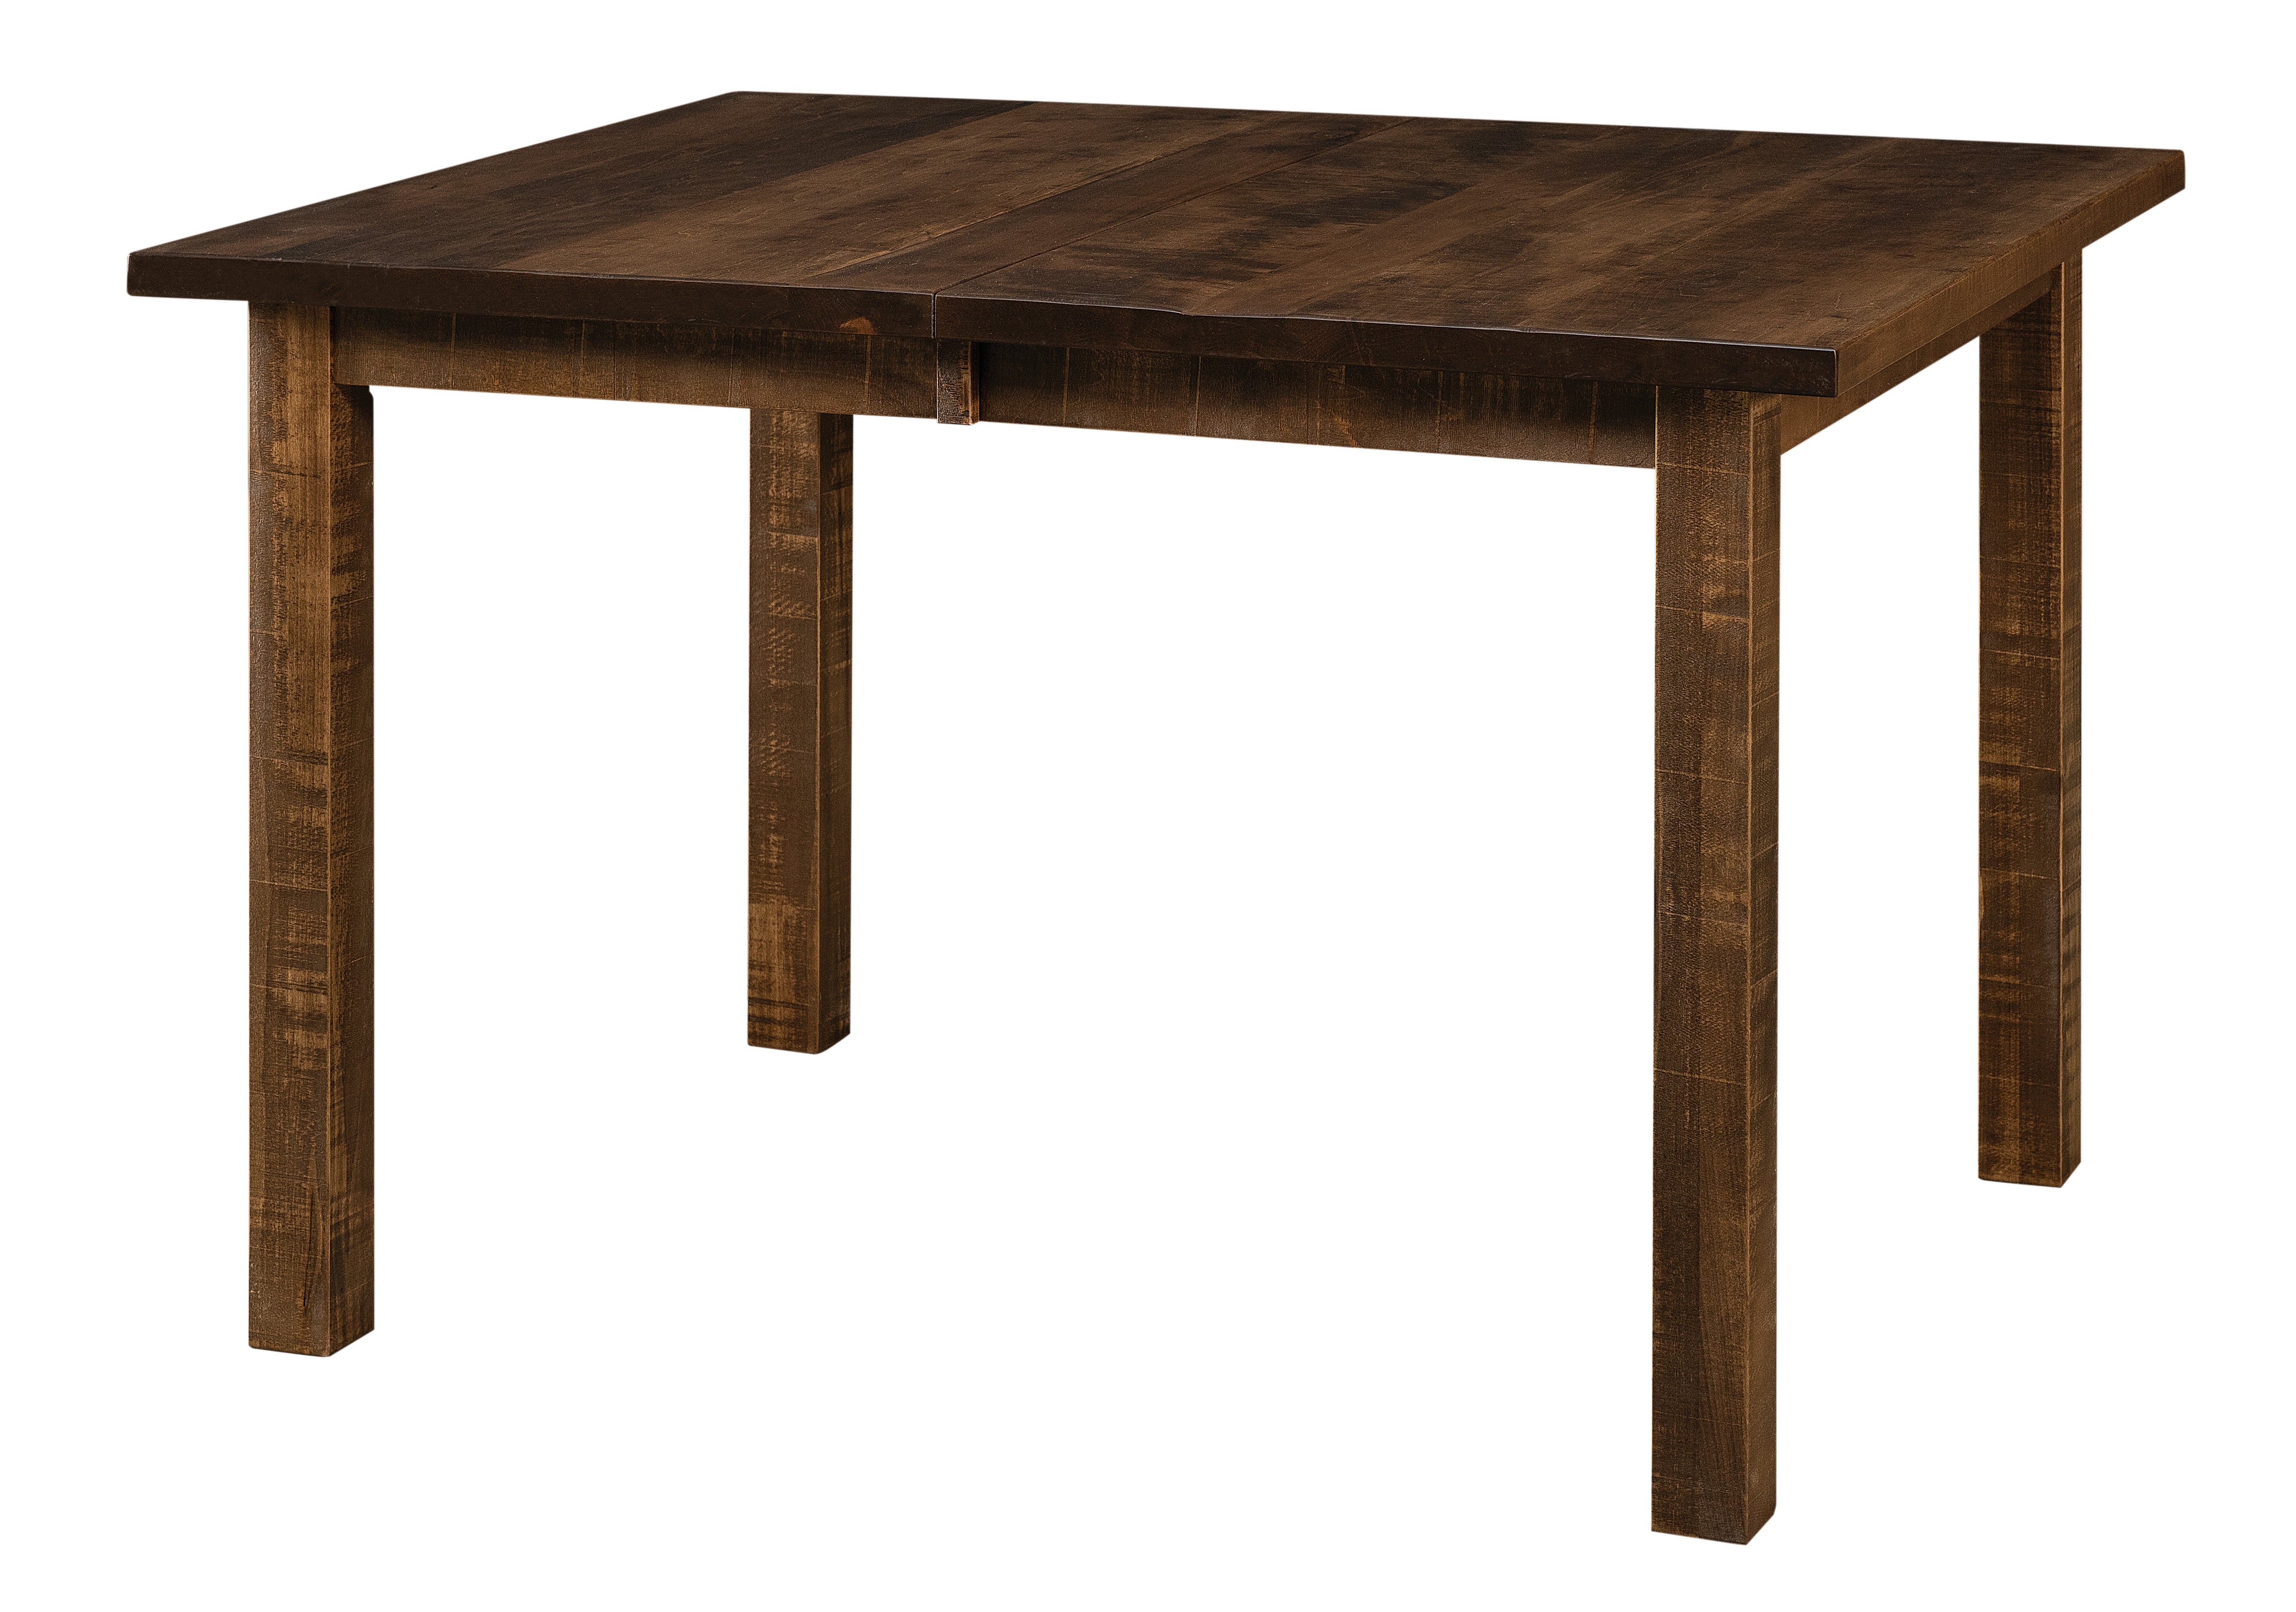 cheyenne leg table shown in rough sawn wormy maple in an almond stain with a 10 sheen finish